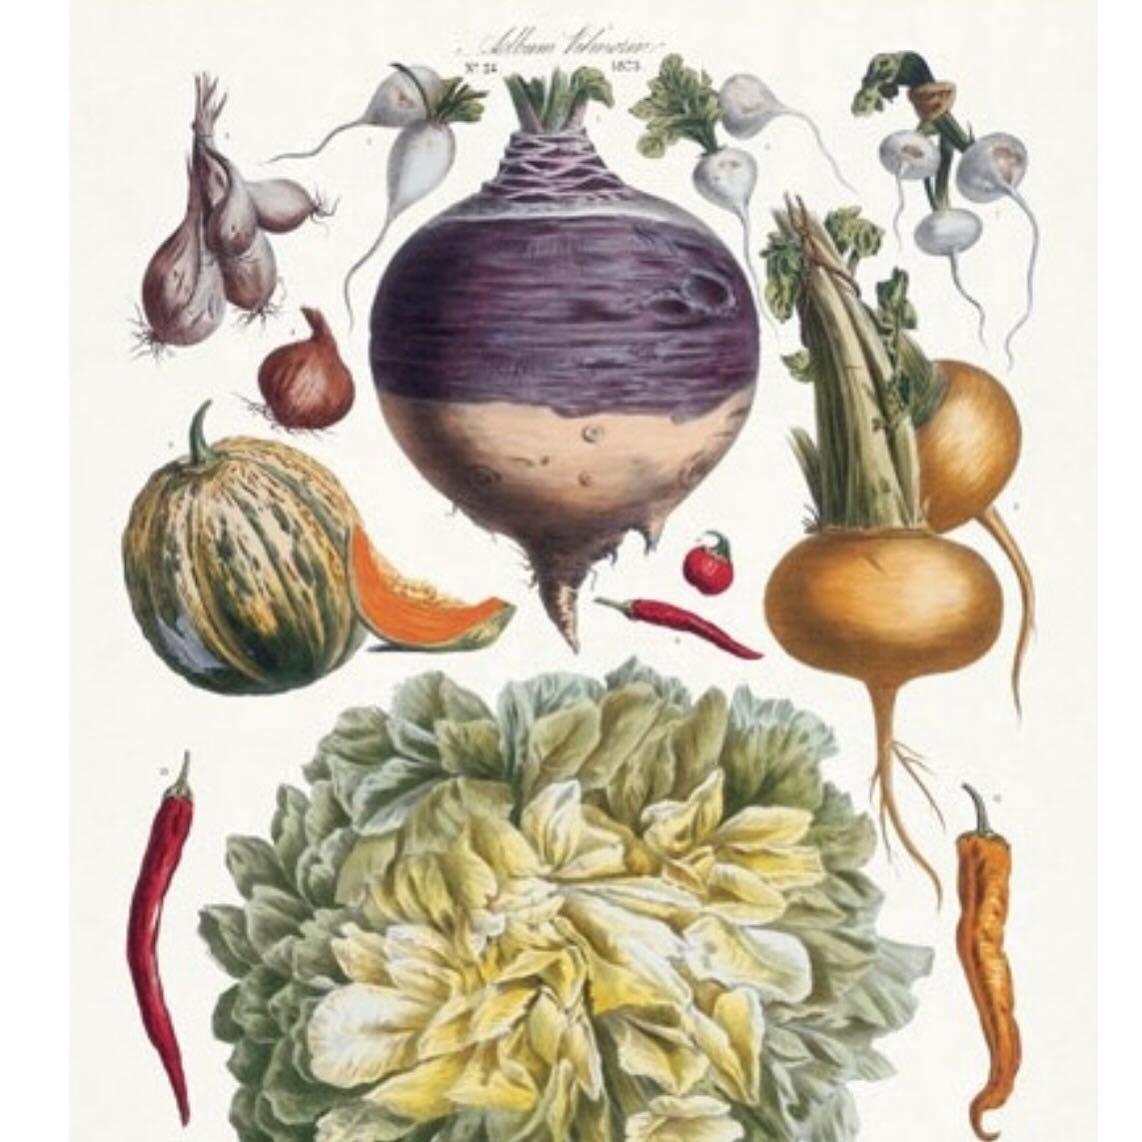 A seed catalogue by French company Vilmorin-Andrieux &amp; Cie, published in 1766 🥕🥦🥬
In the second half of the 18th century, many British estates had large gardens and orchards. Canals could be used to transport produce around the country and roa